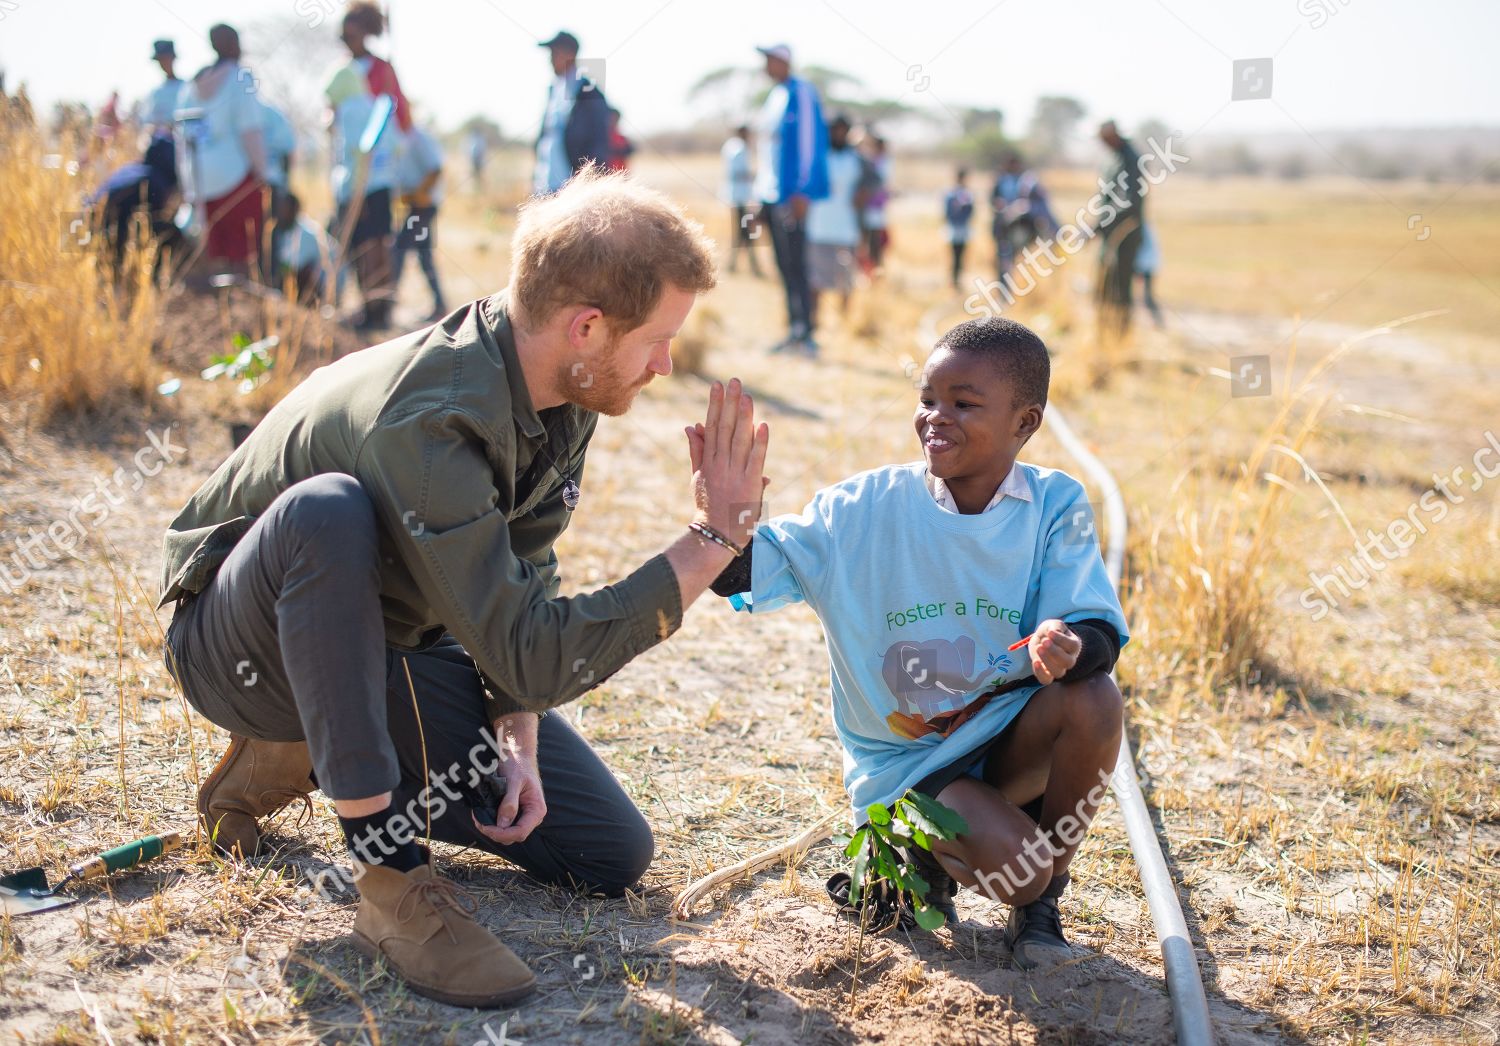 prince-harry-visit-to-africa-shutterstock-editorial-10424667ai.jpg